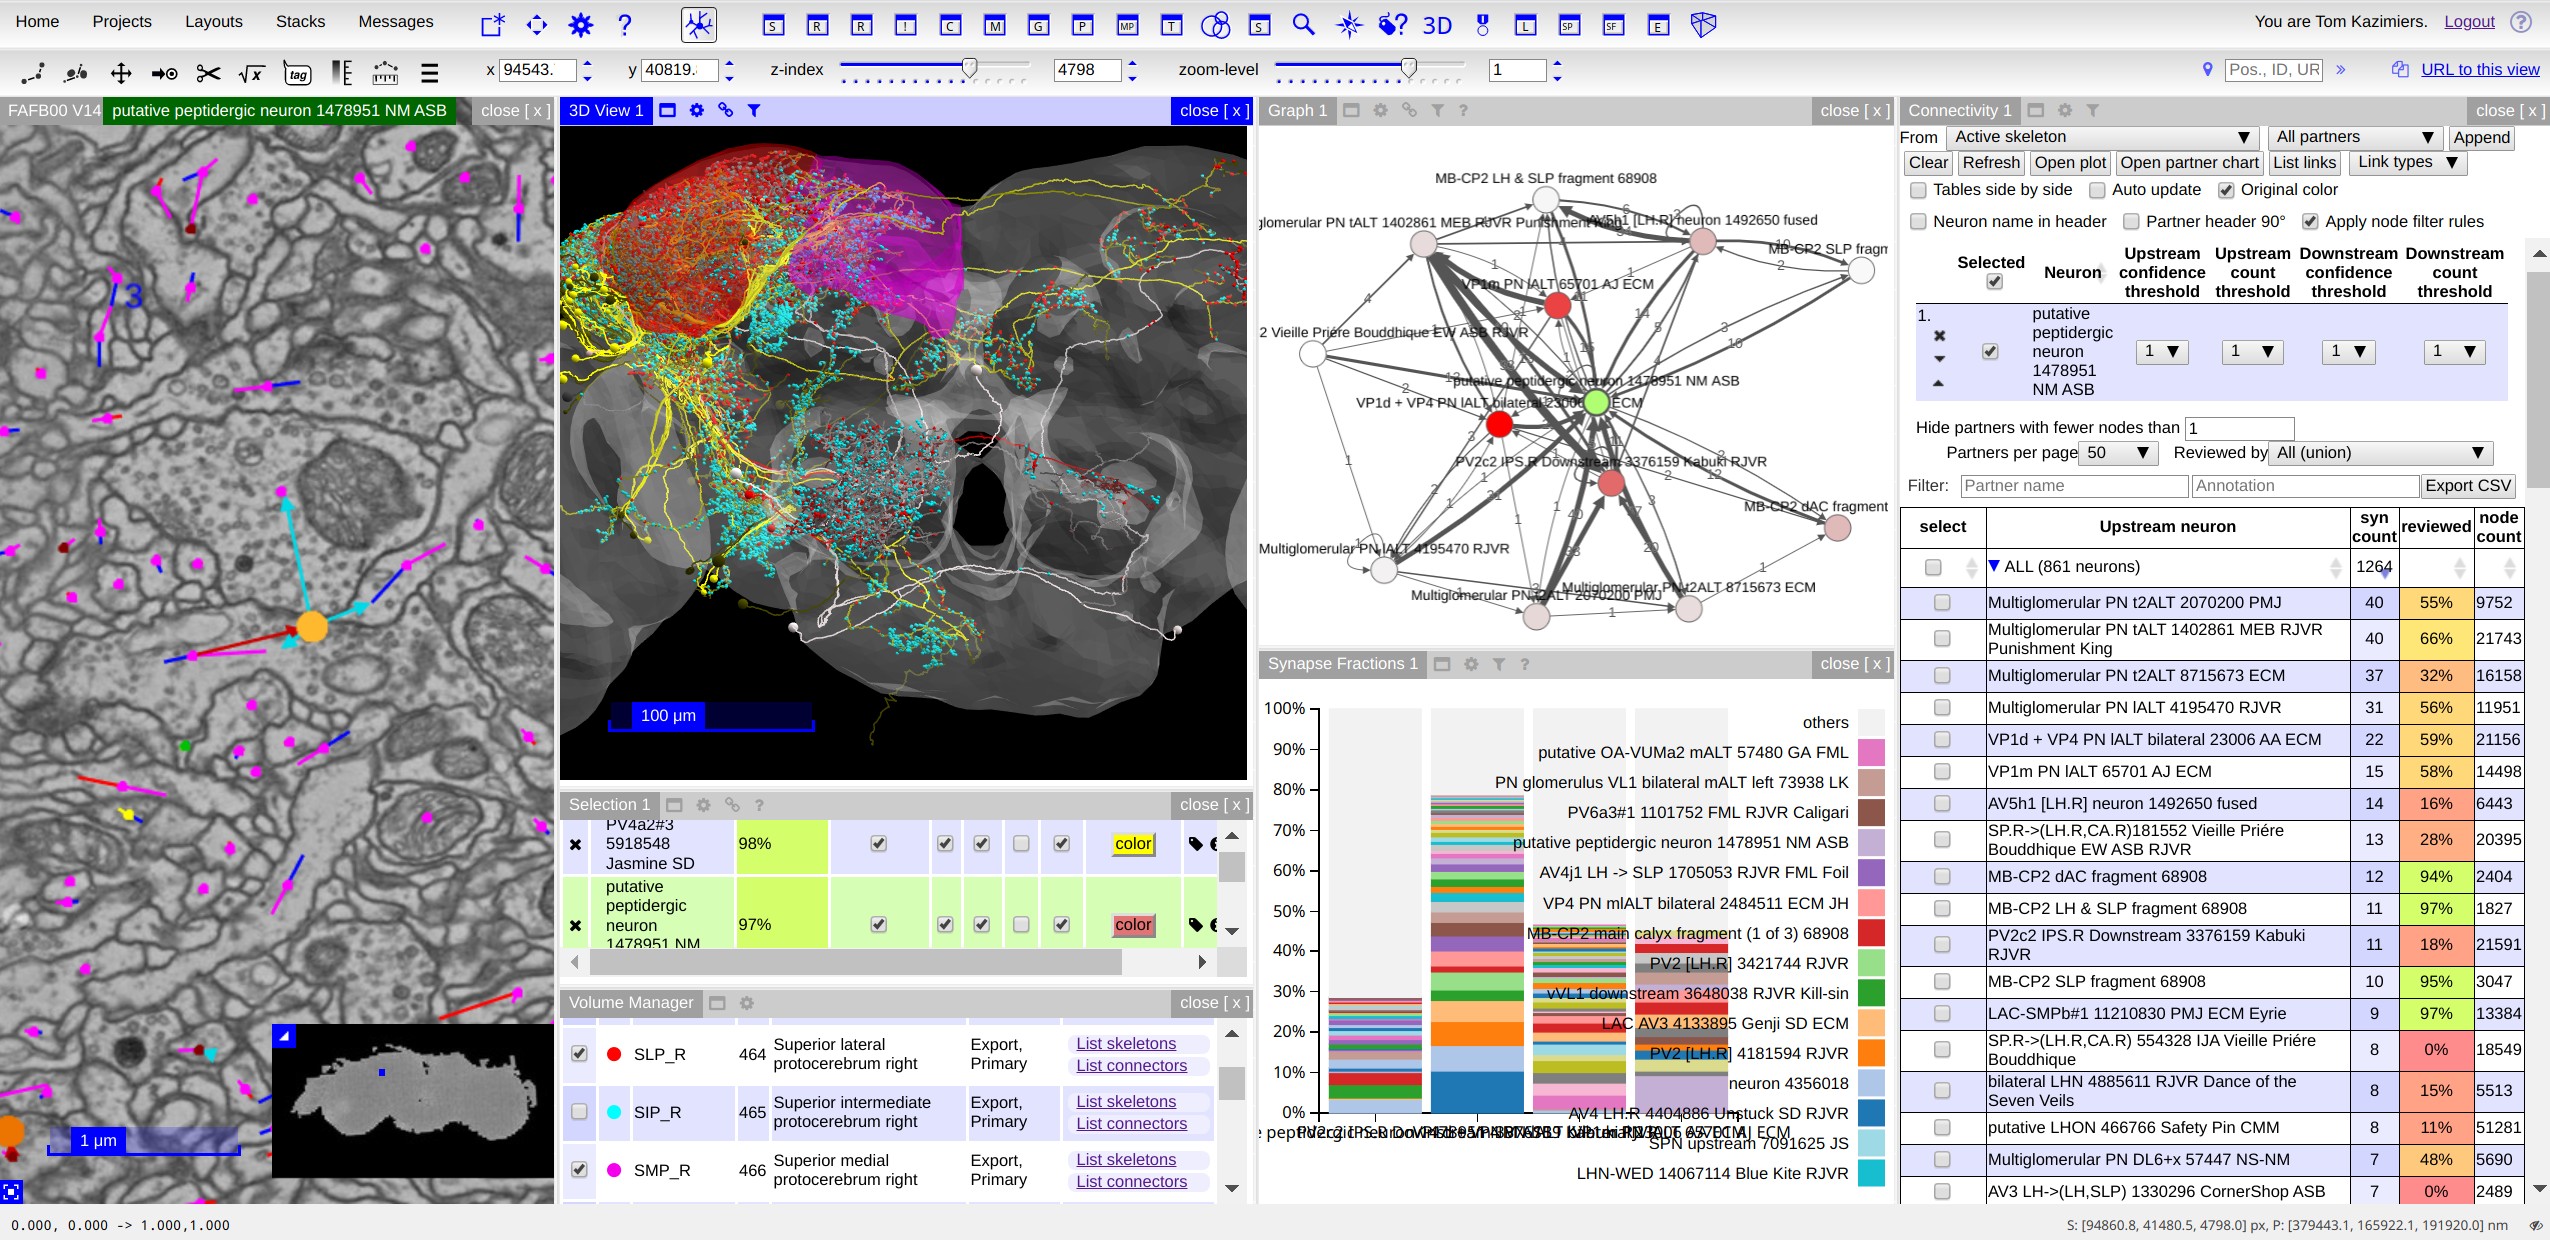 Image of CATMAID's neuron tracing and analysis environment in the FAFB Drosophila dataset